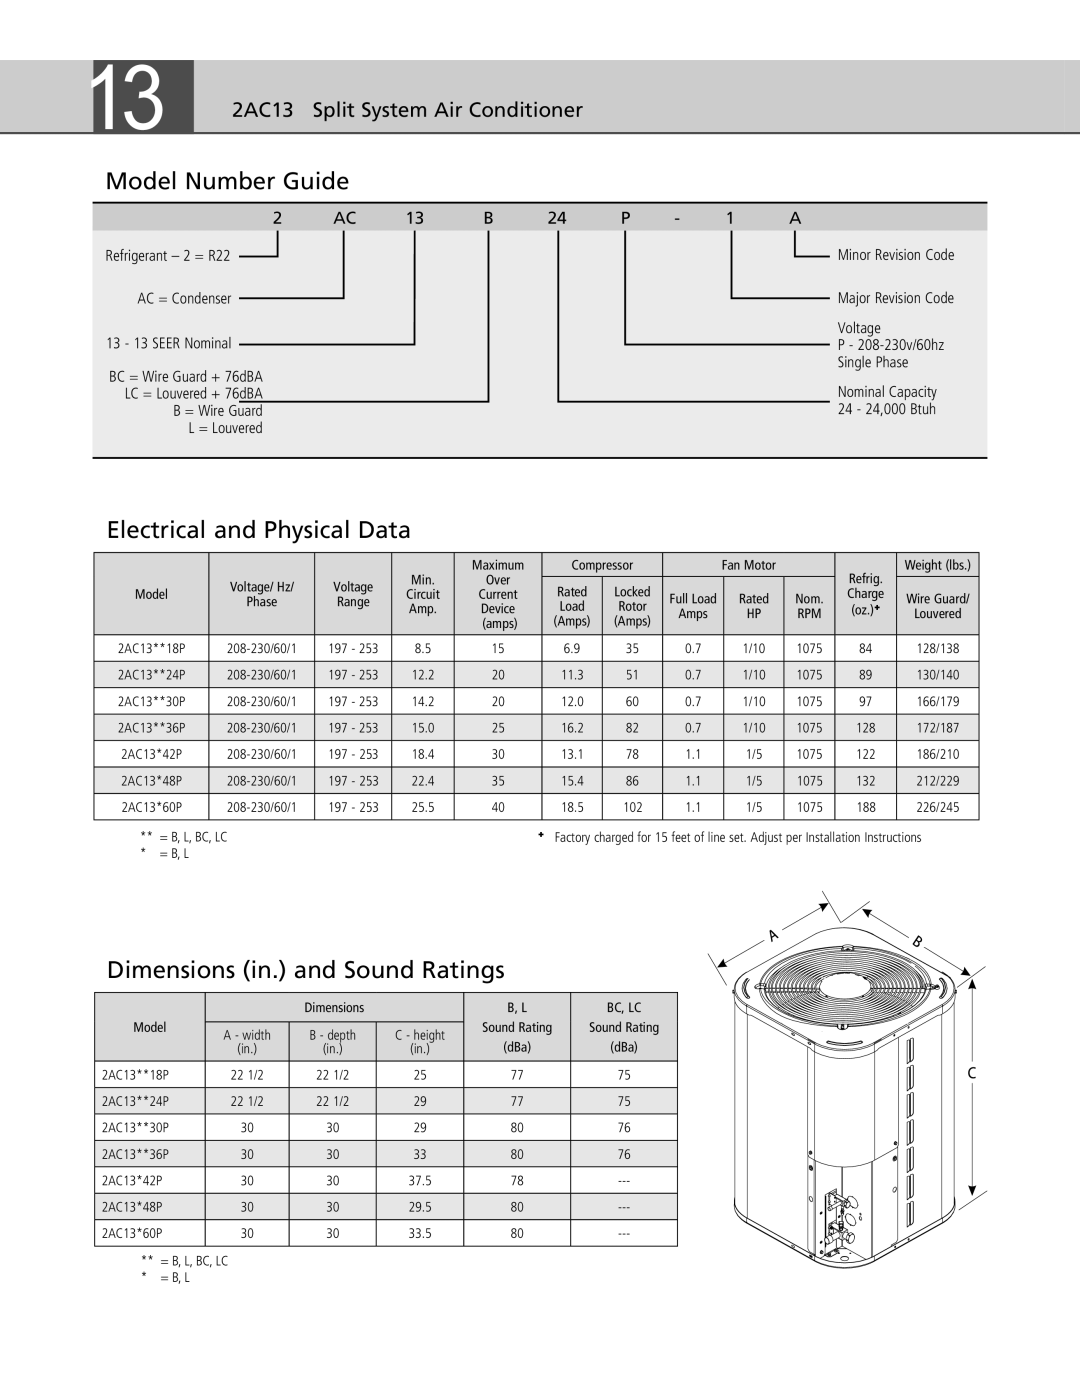 Ducane (HVAC) 2AC13 warranty Model Number Guide, Electrical and Physical Data, Dimensions in. and Sound Ratings 